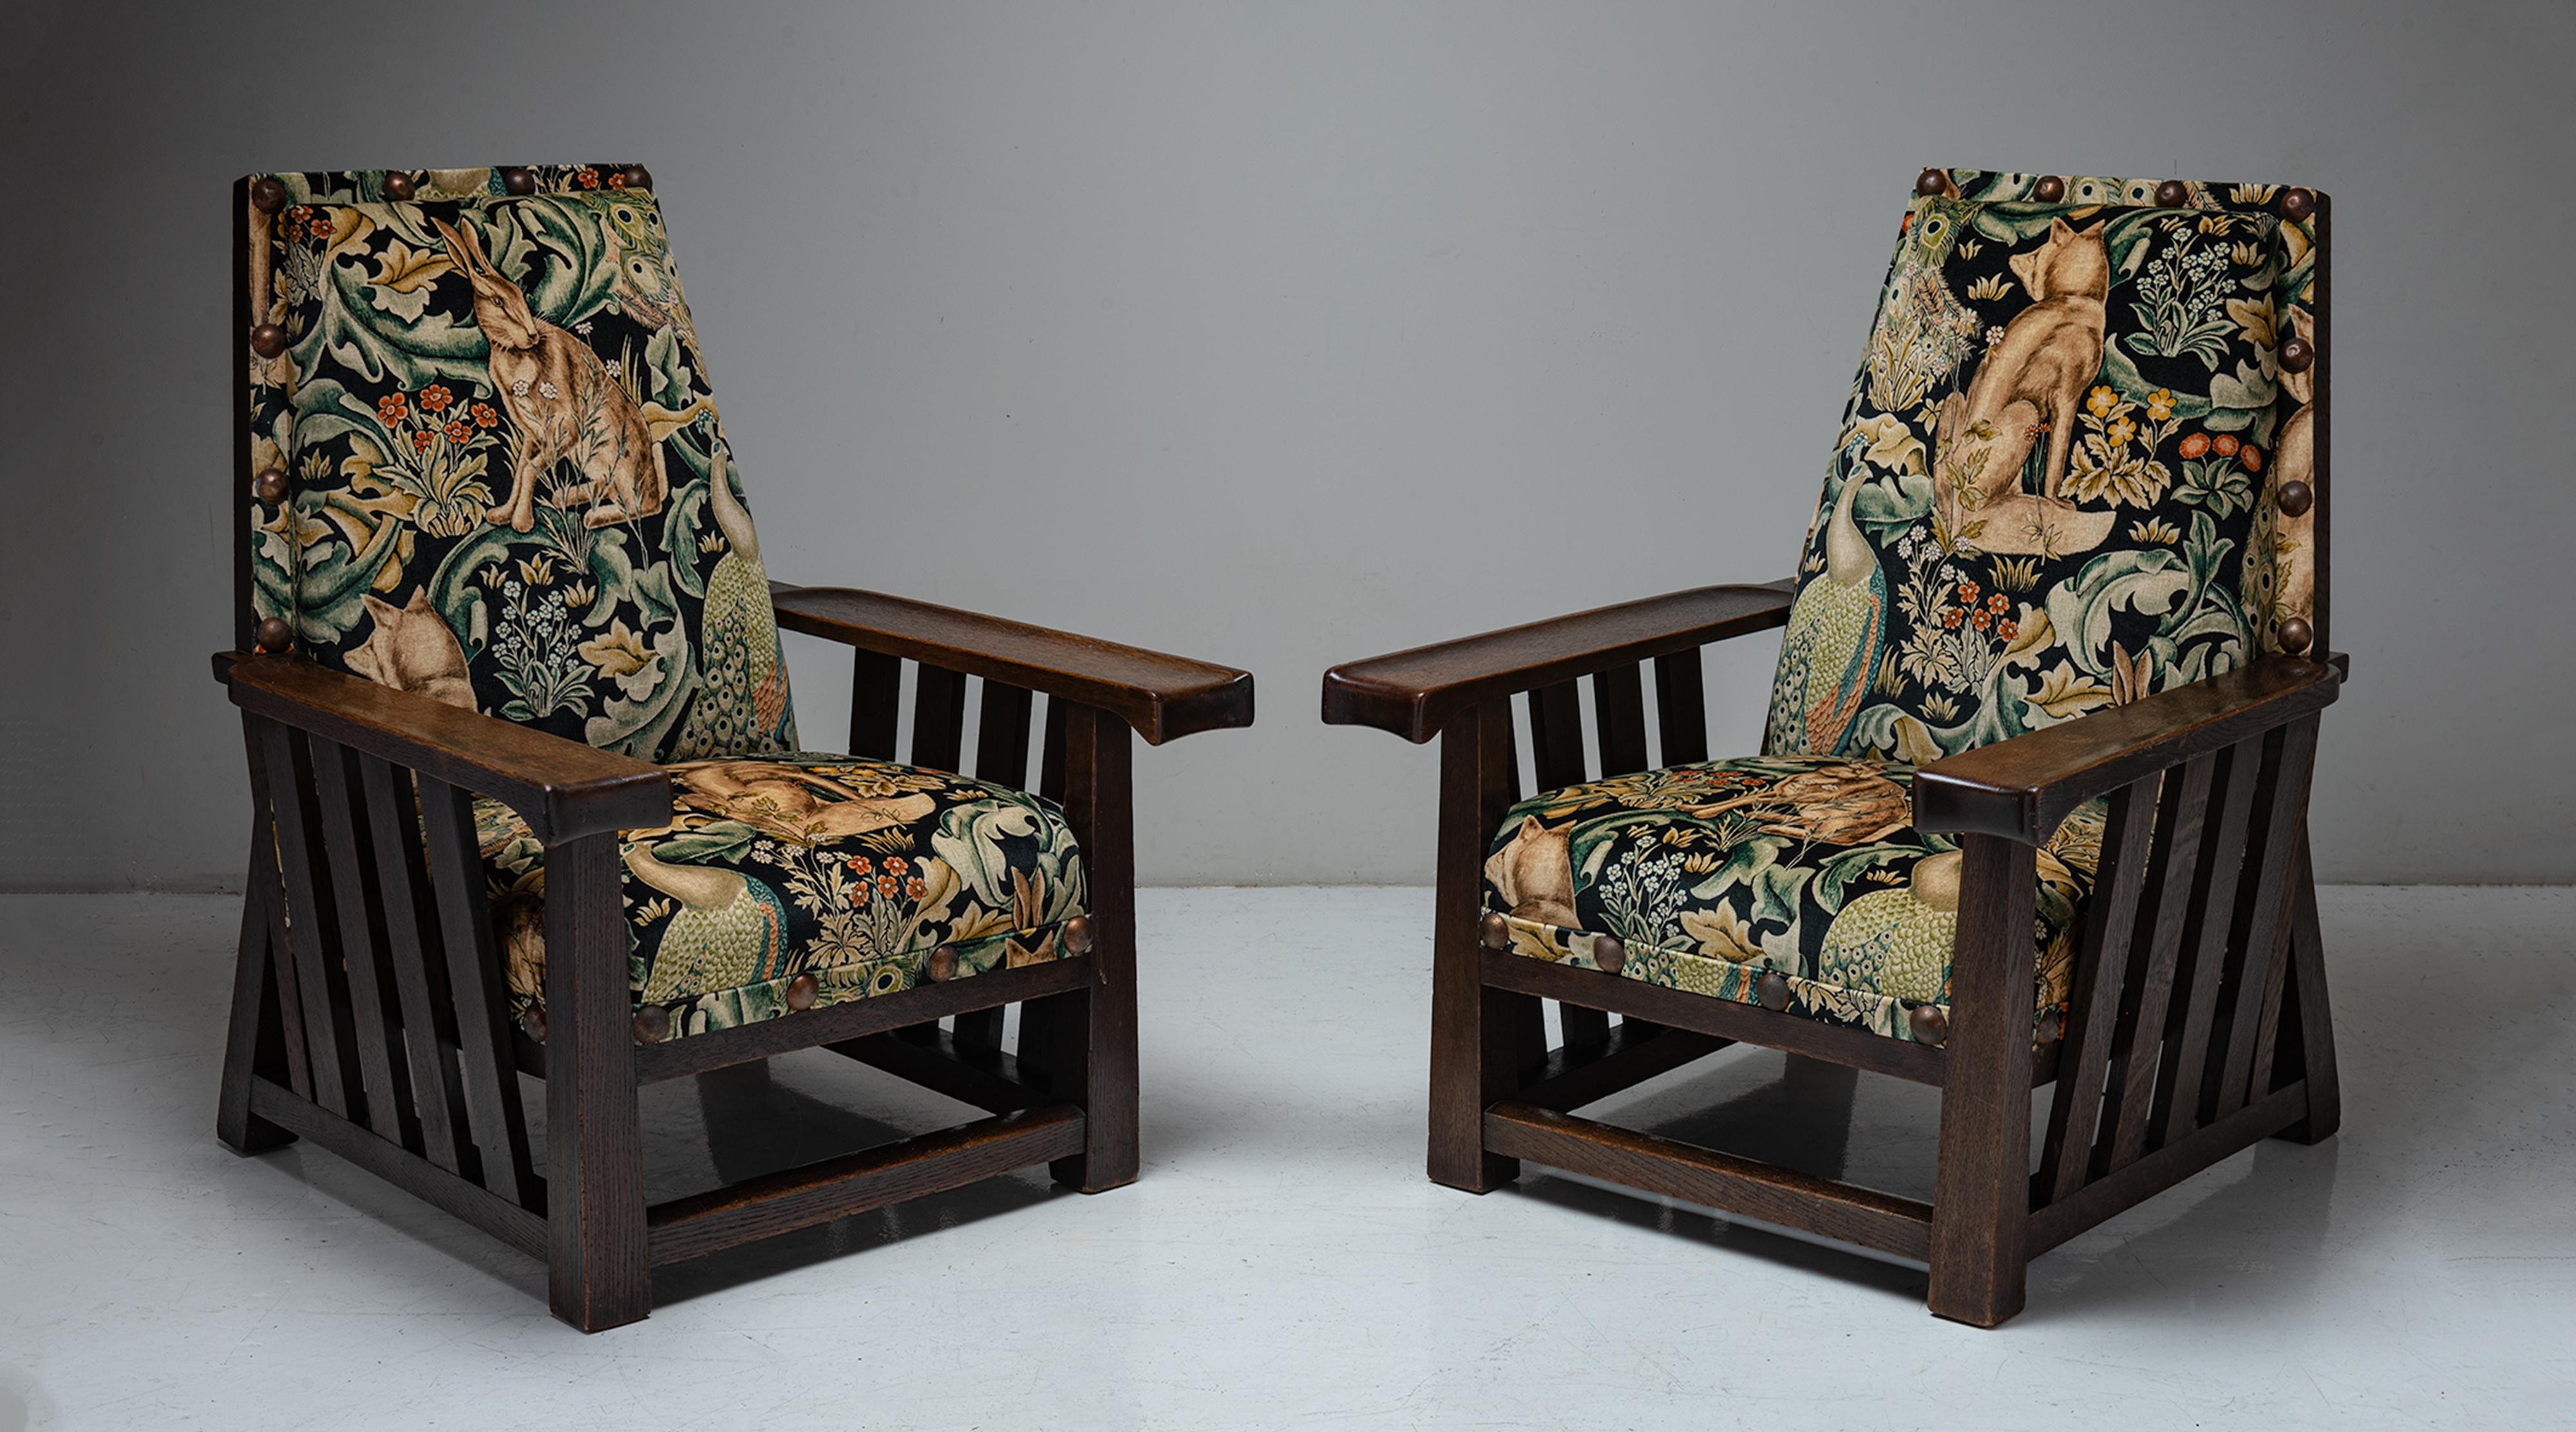 Pair of oak armchairs by Leonard Wyburd in cotton velvet from William Morris
England, circa 1900

Substantial Arts & Crafts armchairs with slatted oak sides and original brass studs, reupholstered in Forest Velvet by William Morris.
Measures: